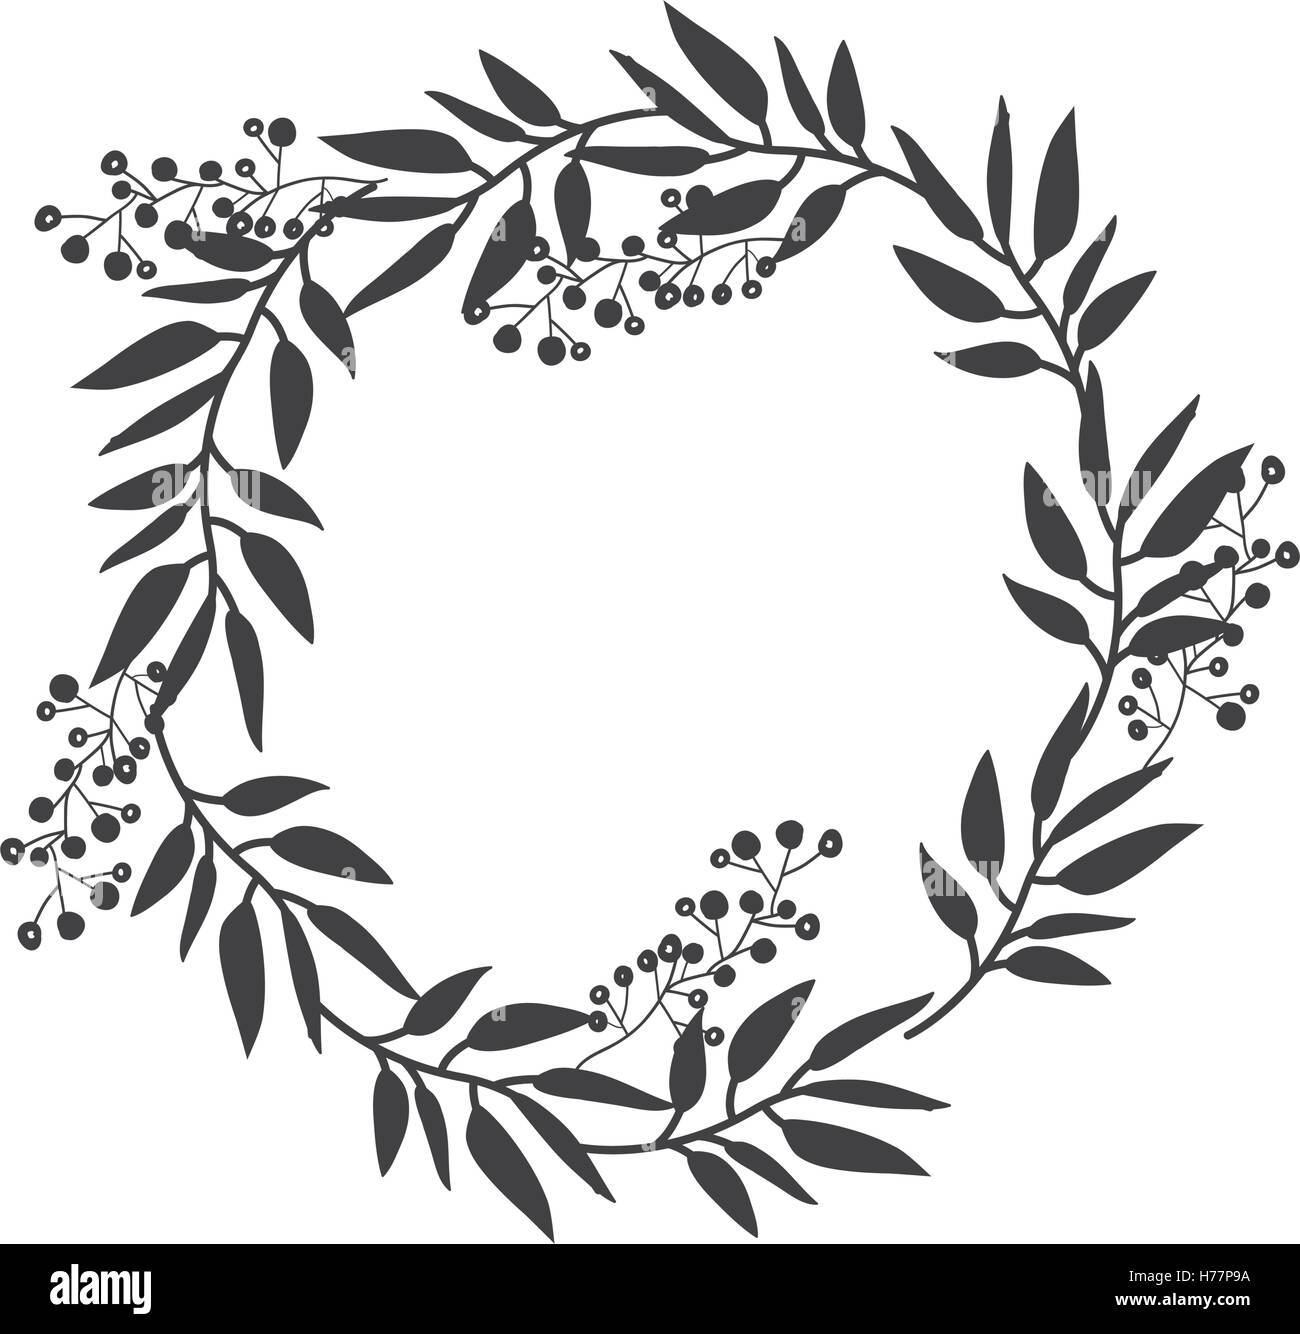 gray scale decorative crown of branch olive large leaves vector illustration Stock Vector